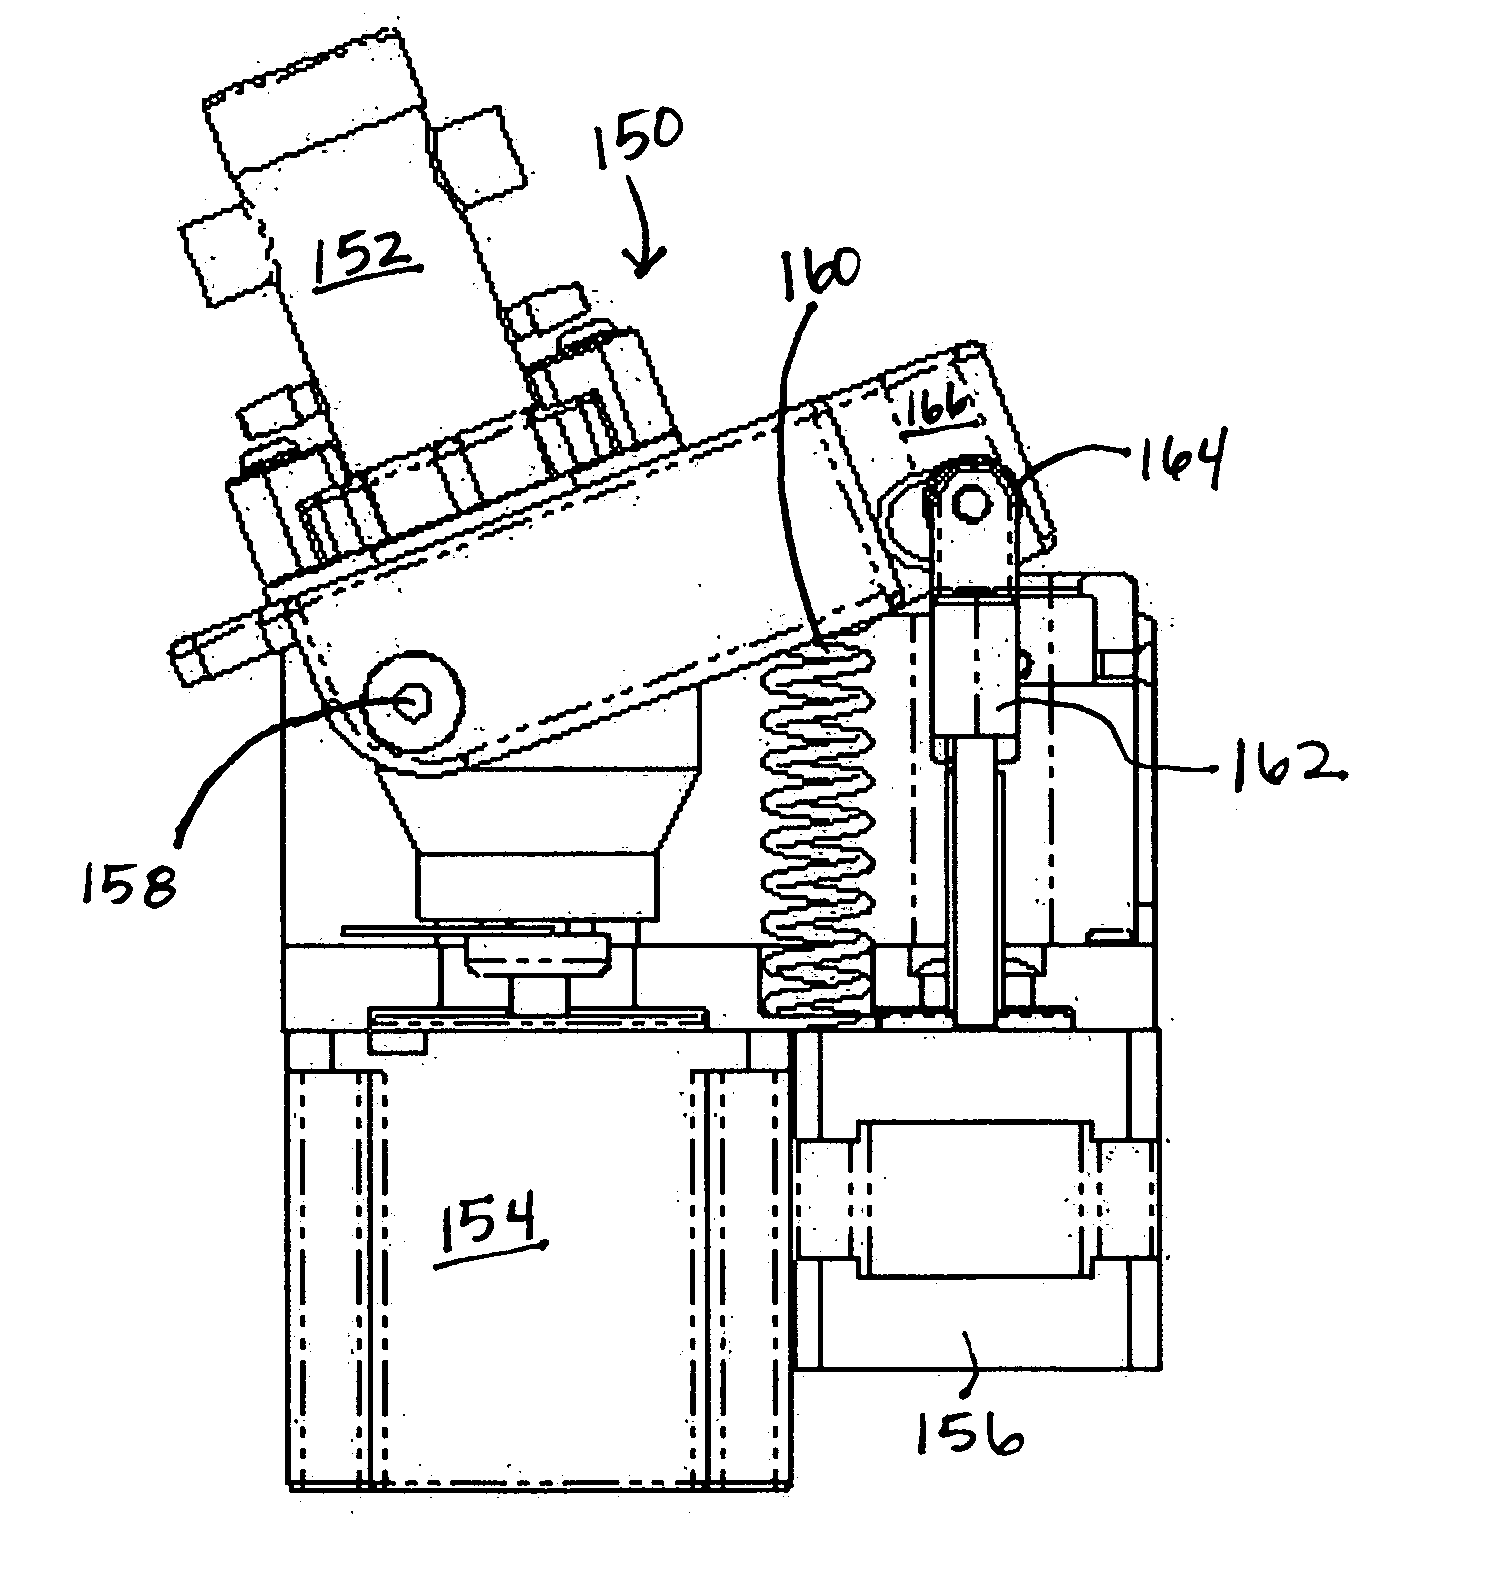 Systems and methods for providing a dynamically adjustable reciprocating fluid dispenser